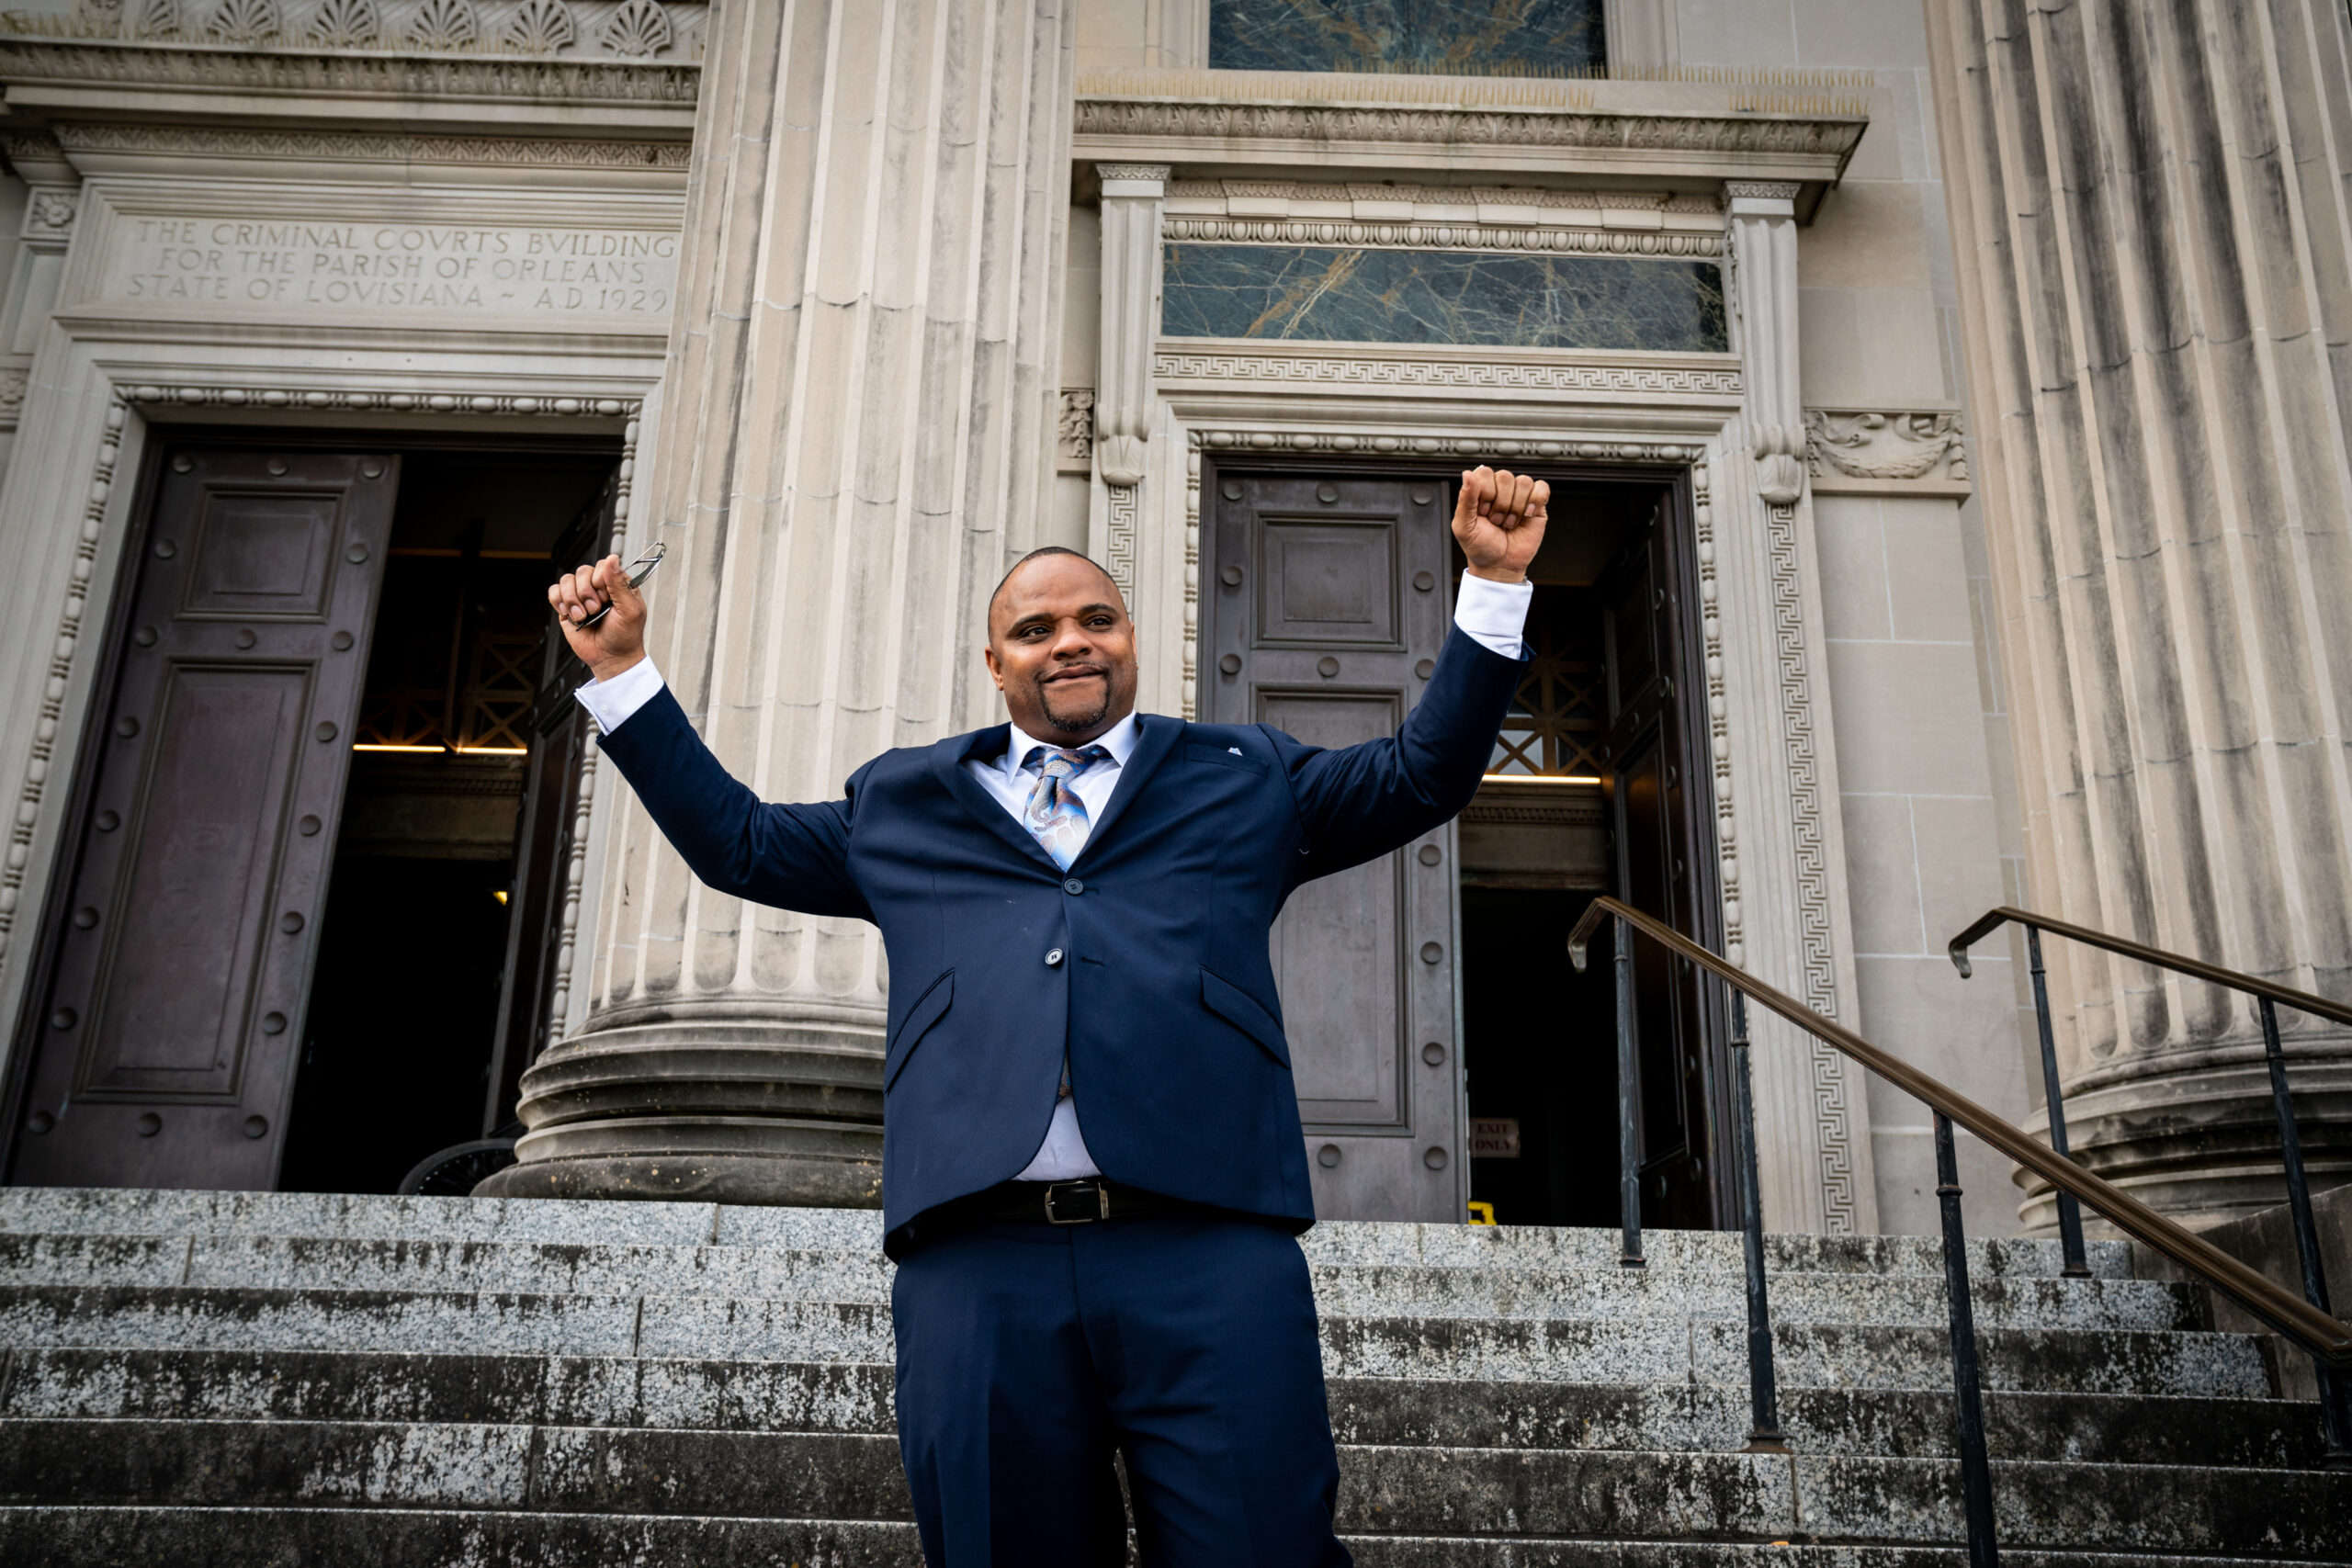 Darrill Henry leaving the Orleans Parish Criminal Court in January 2023. (Image: Claire Bangser/Innocence Project)